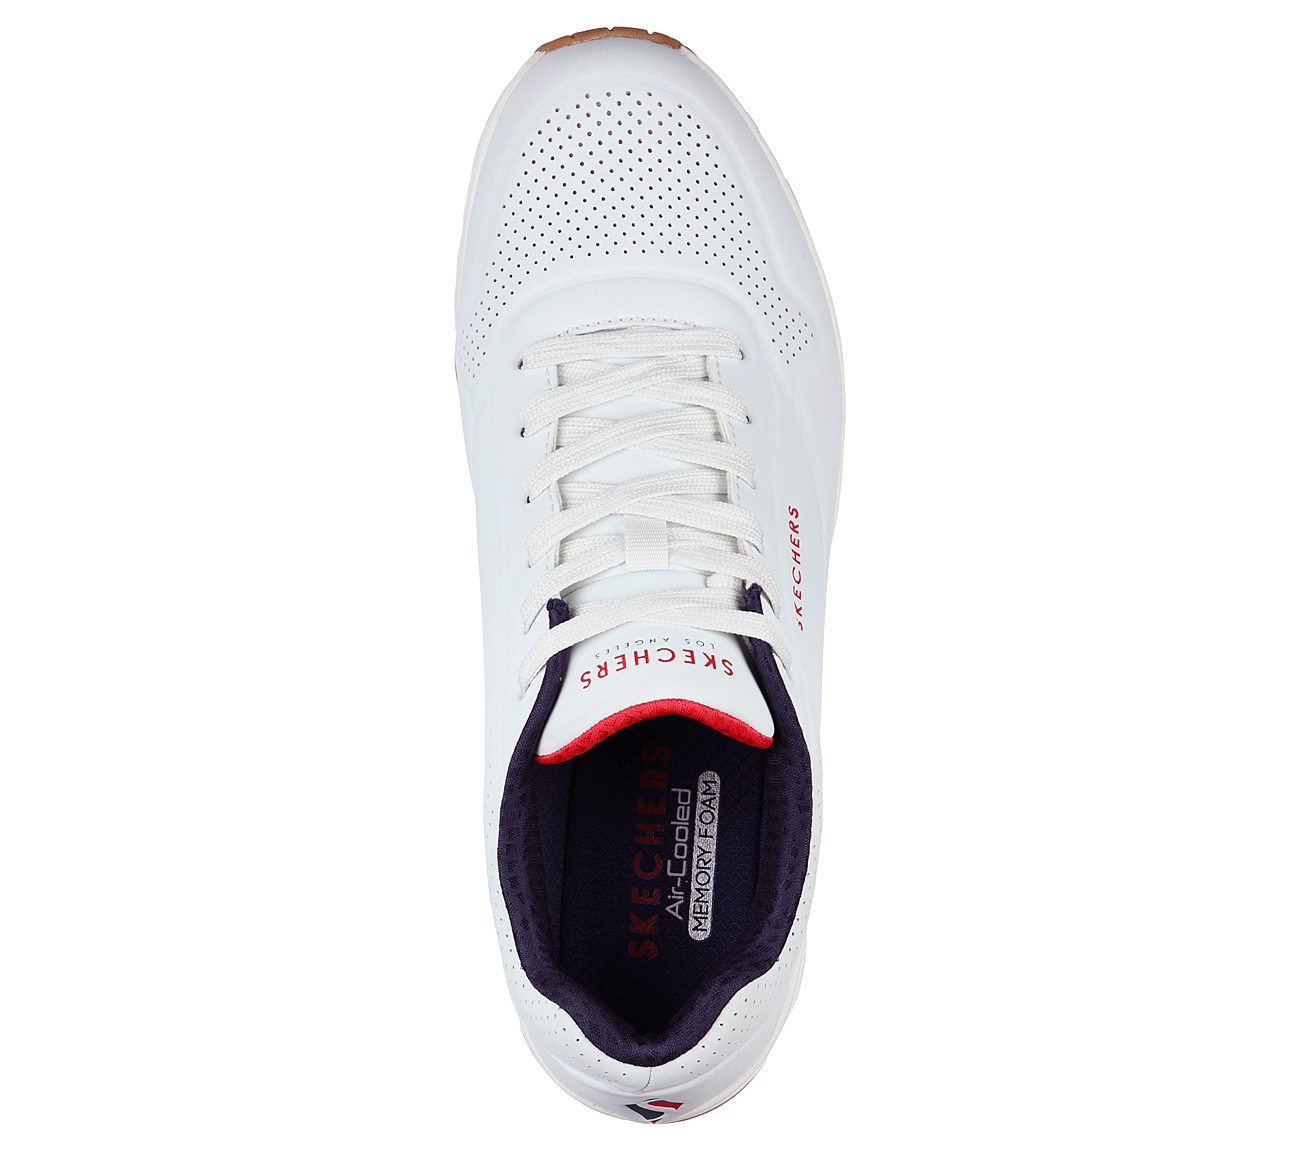 UNO - STAND ON AIR, WHITE/NAVY/RED Footwear Top View